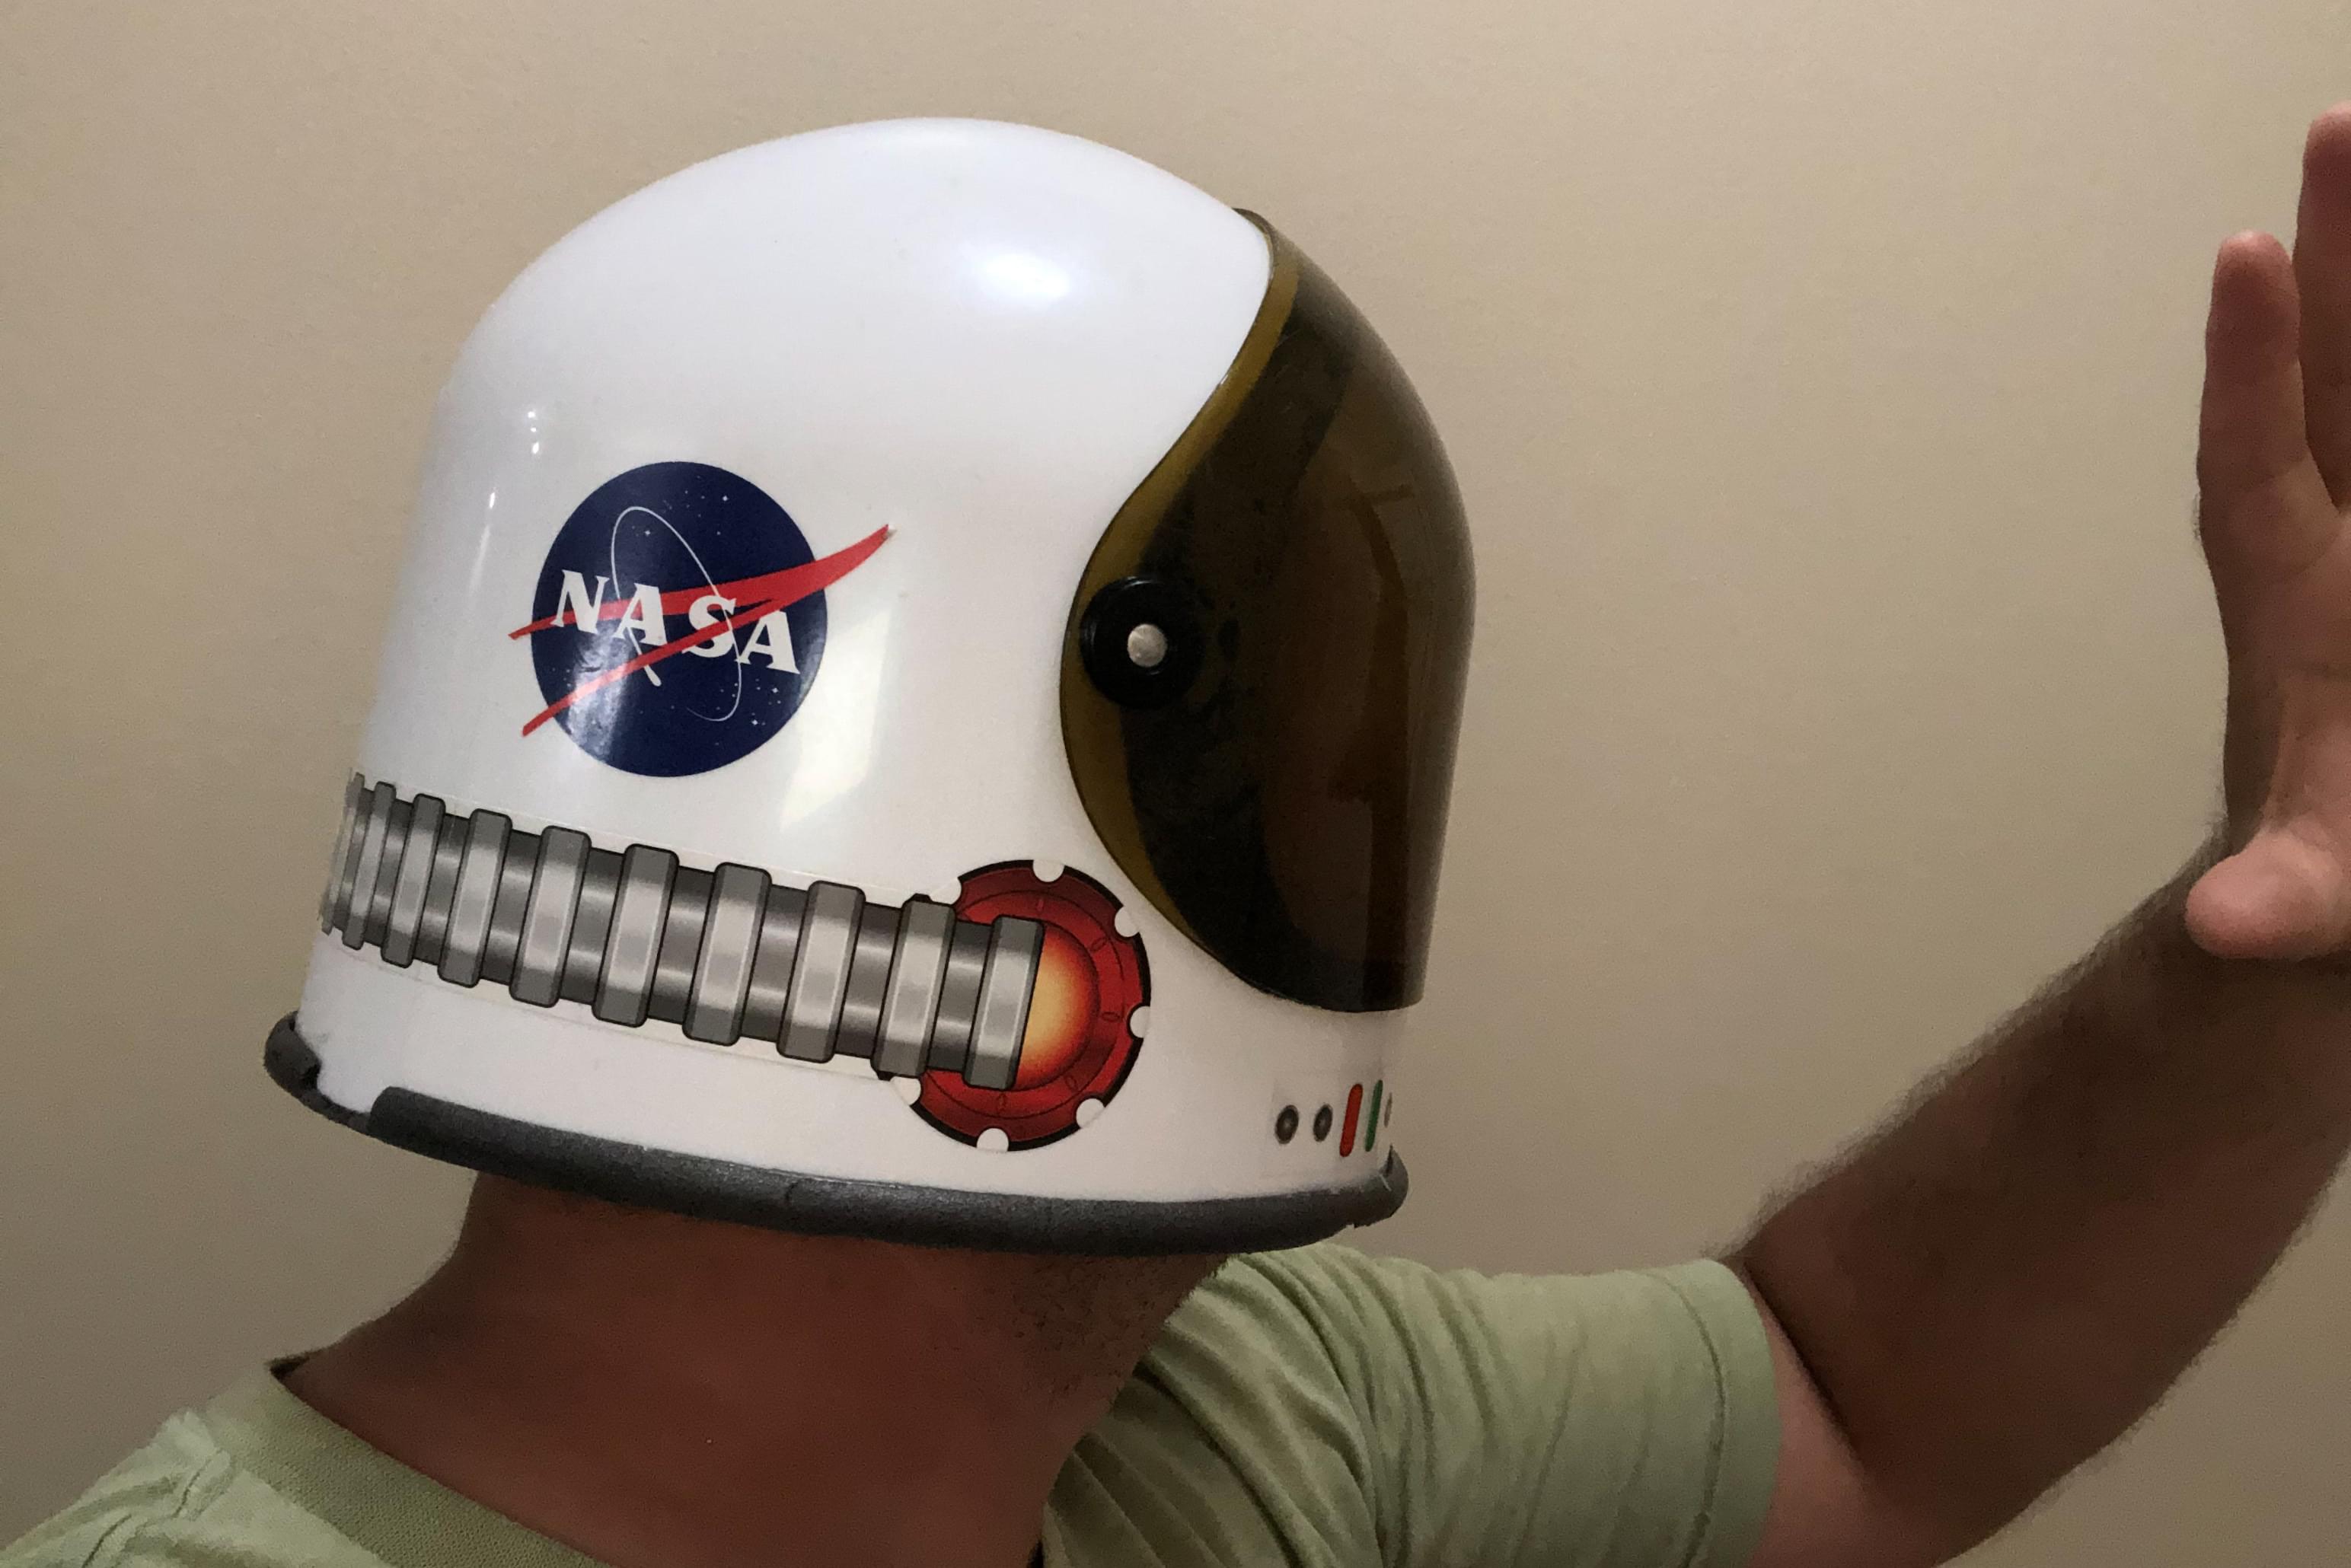 Testing 3rd Party Space Helmets For NASA